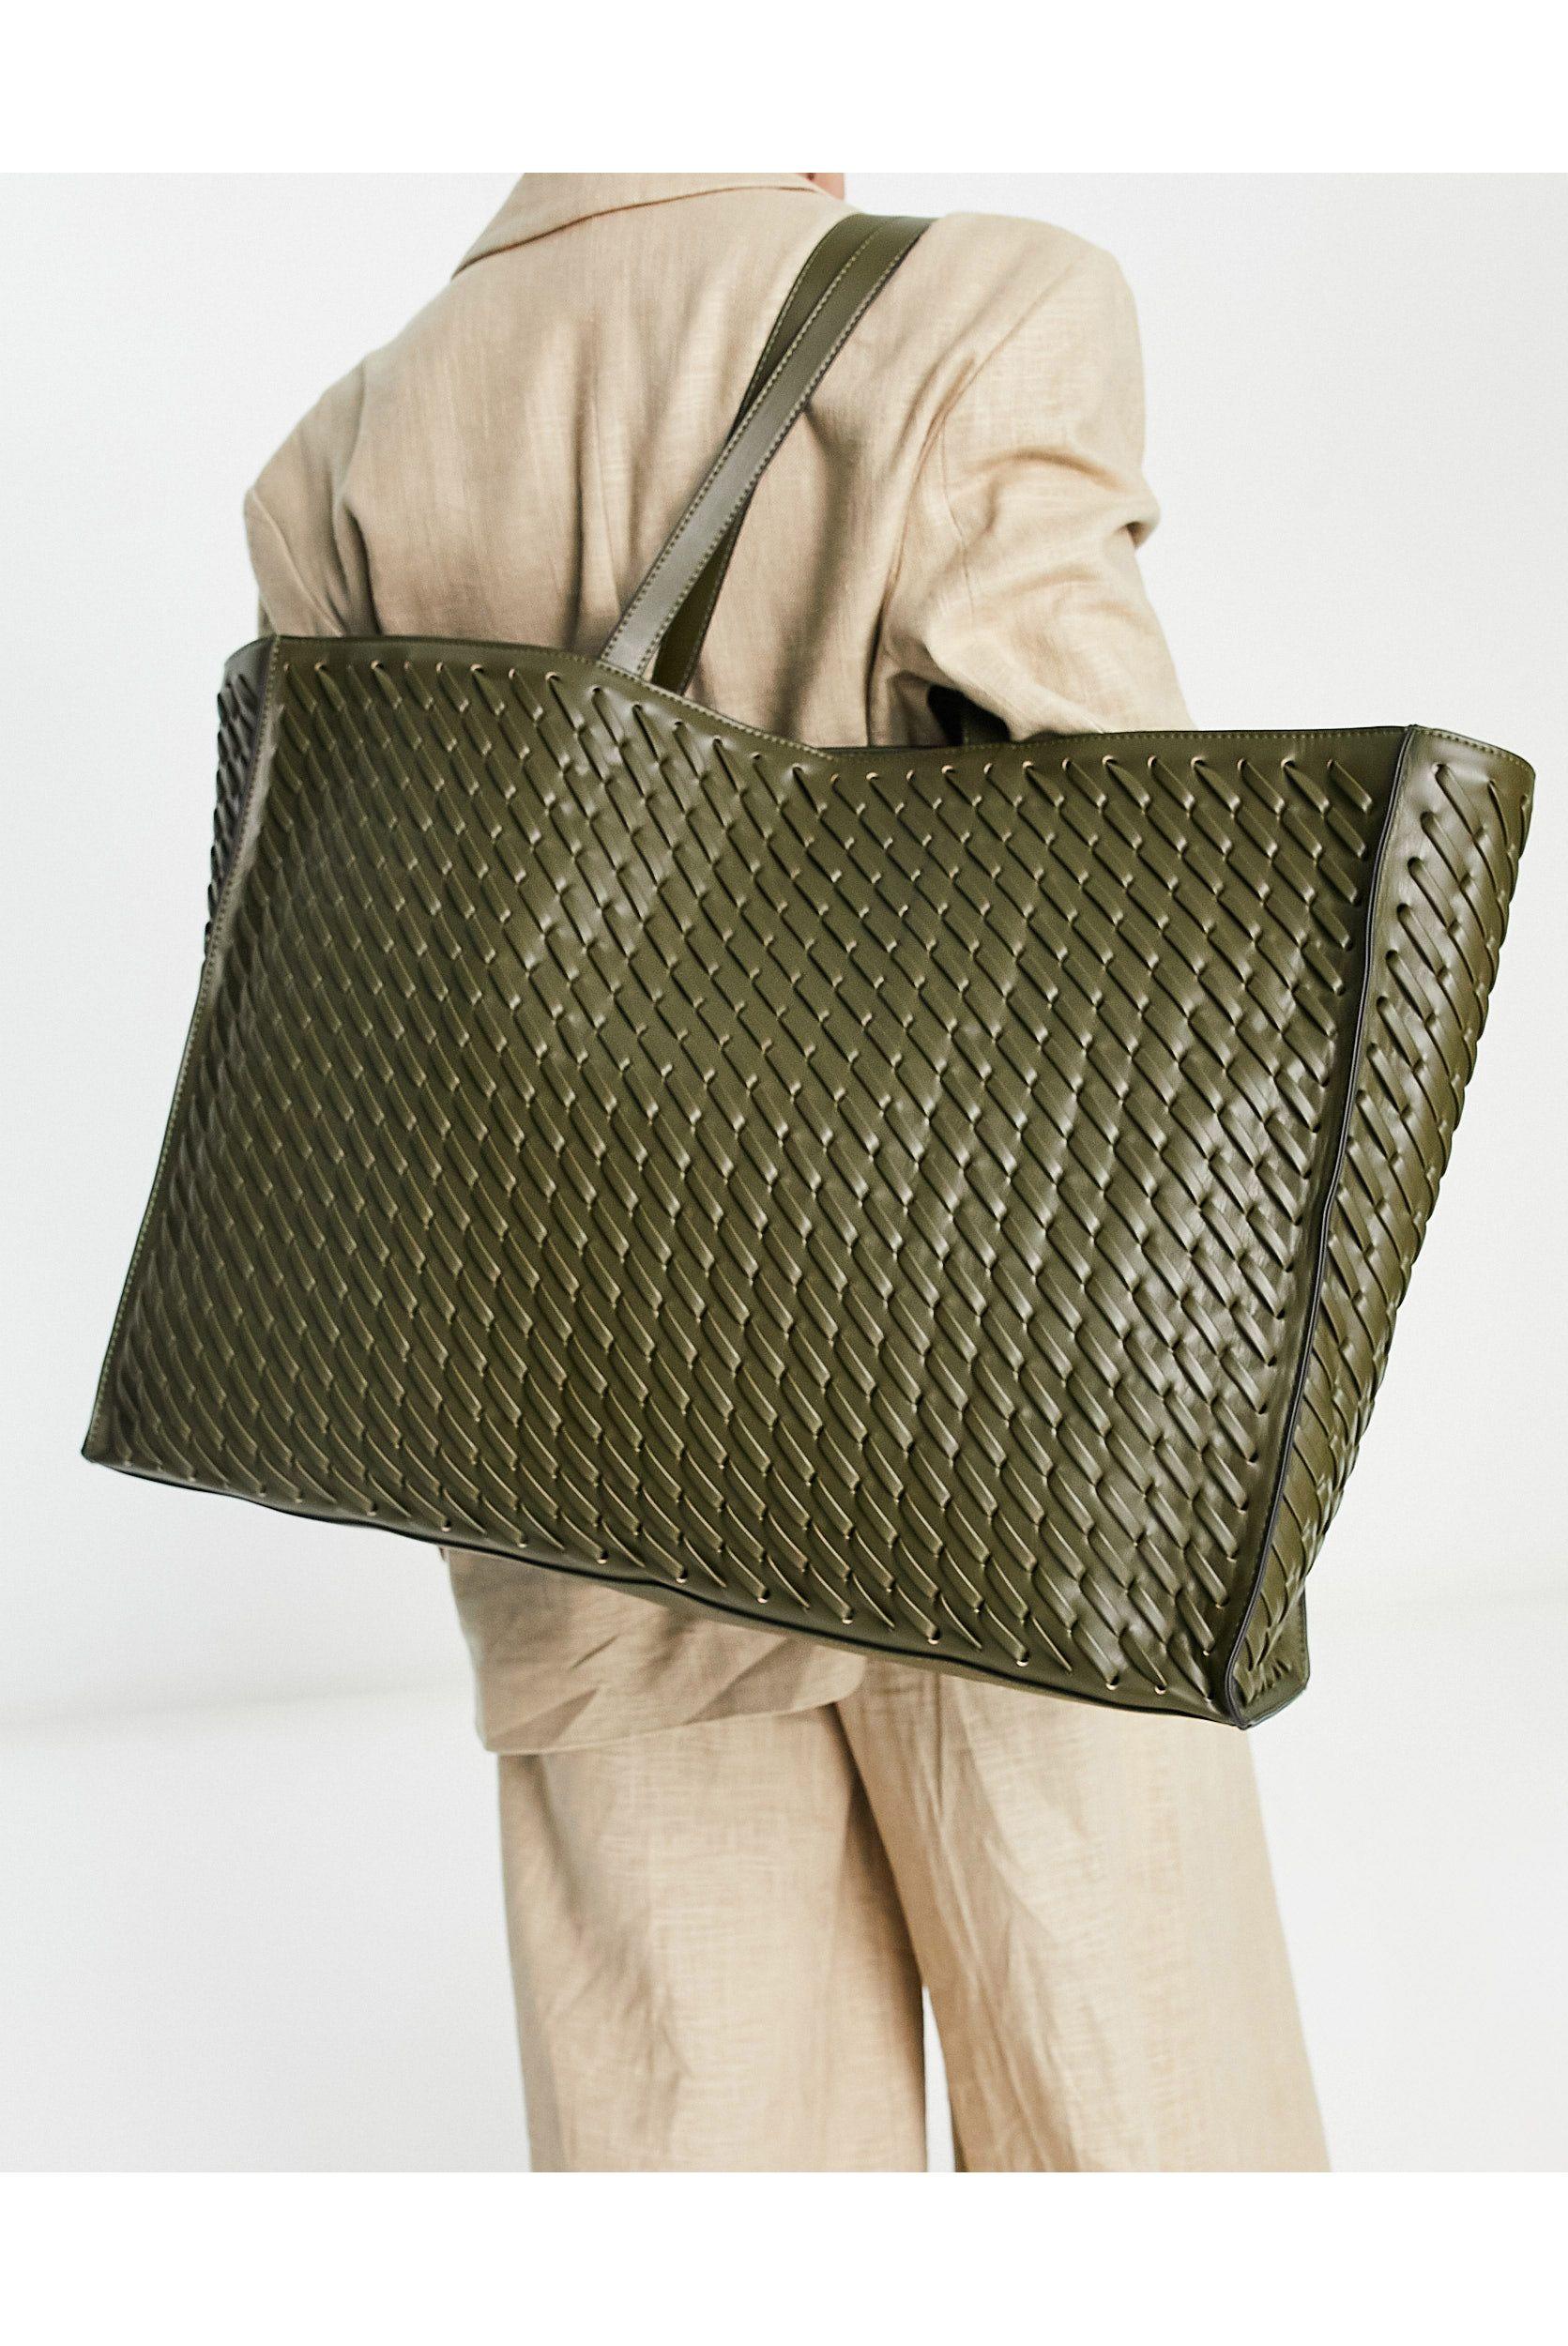 TOPSHOP Tia Oversized Weave Tote in Green | Lyst